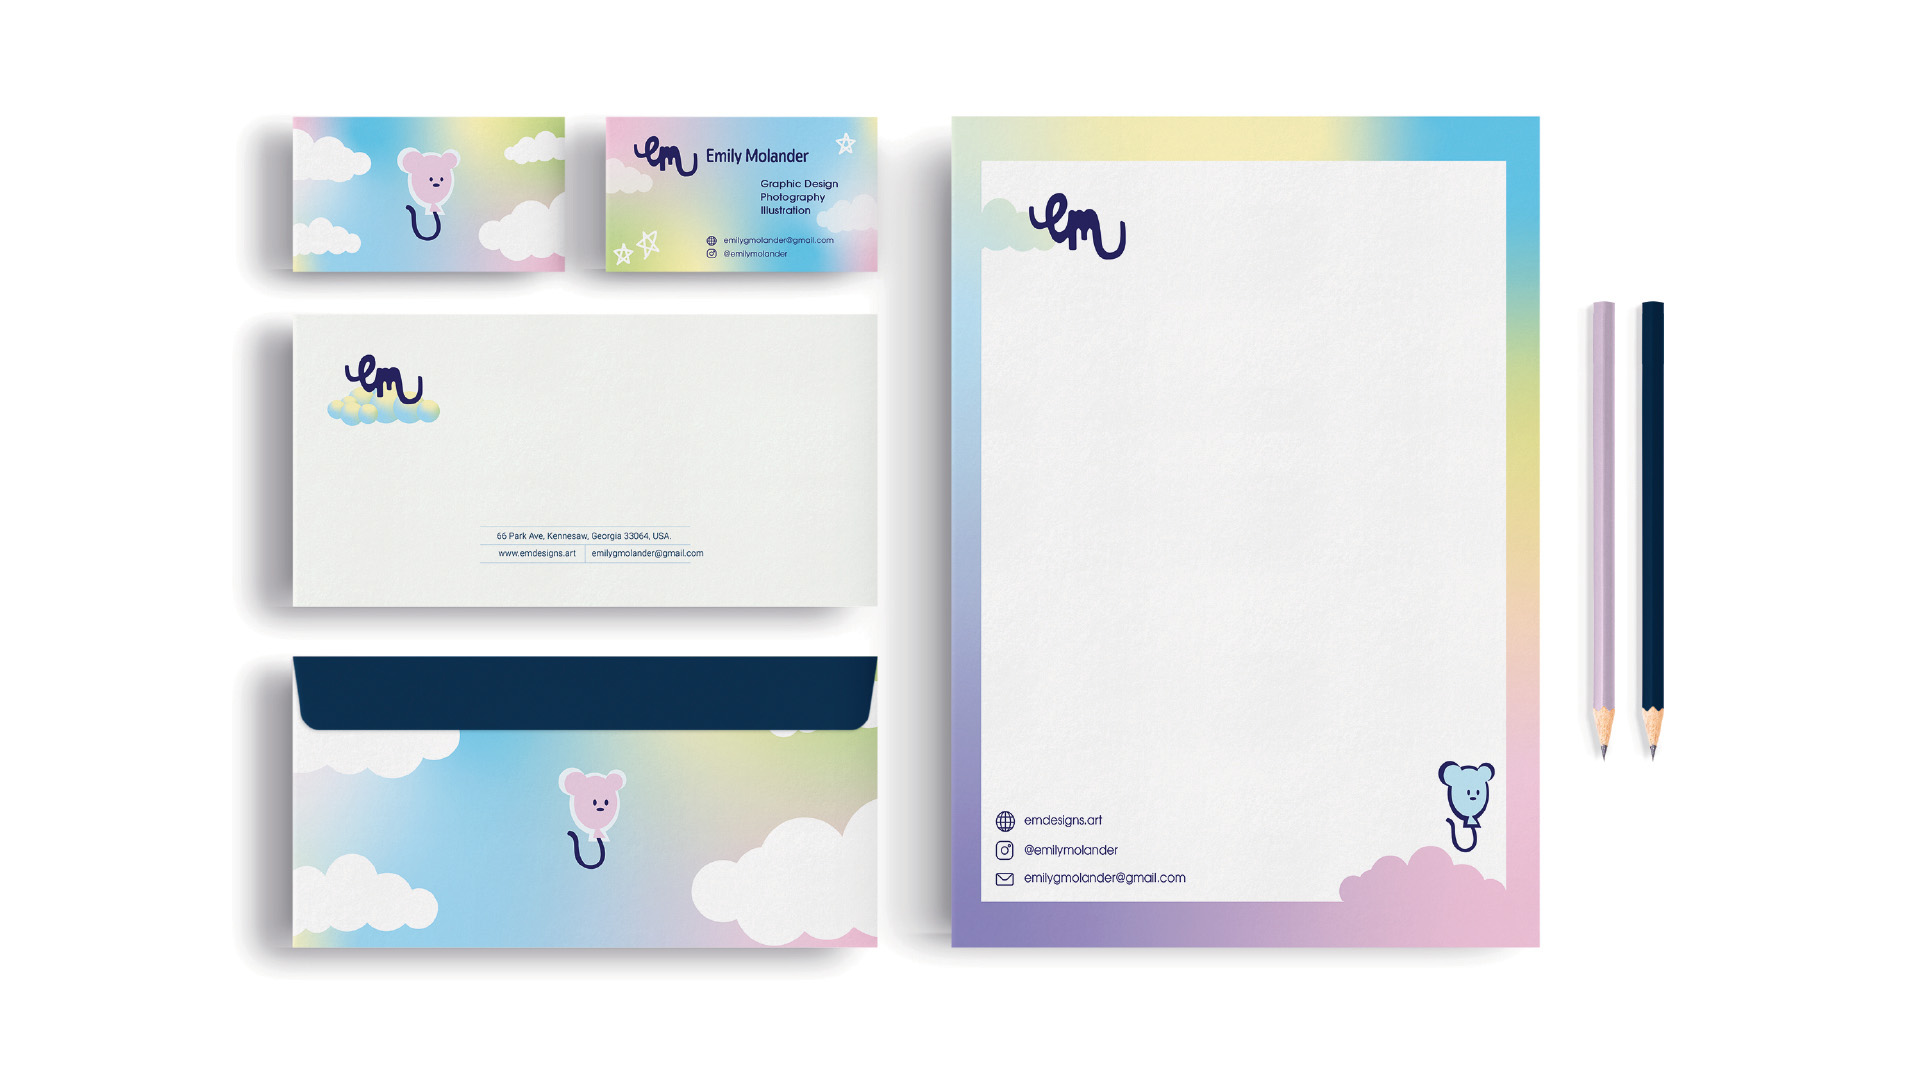 Personal Branding / "Personal Branding," personal branding design, 2023. Branding Design for Molander, which includes: Logo, Business Card, Envelope, and Letterhead. 